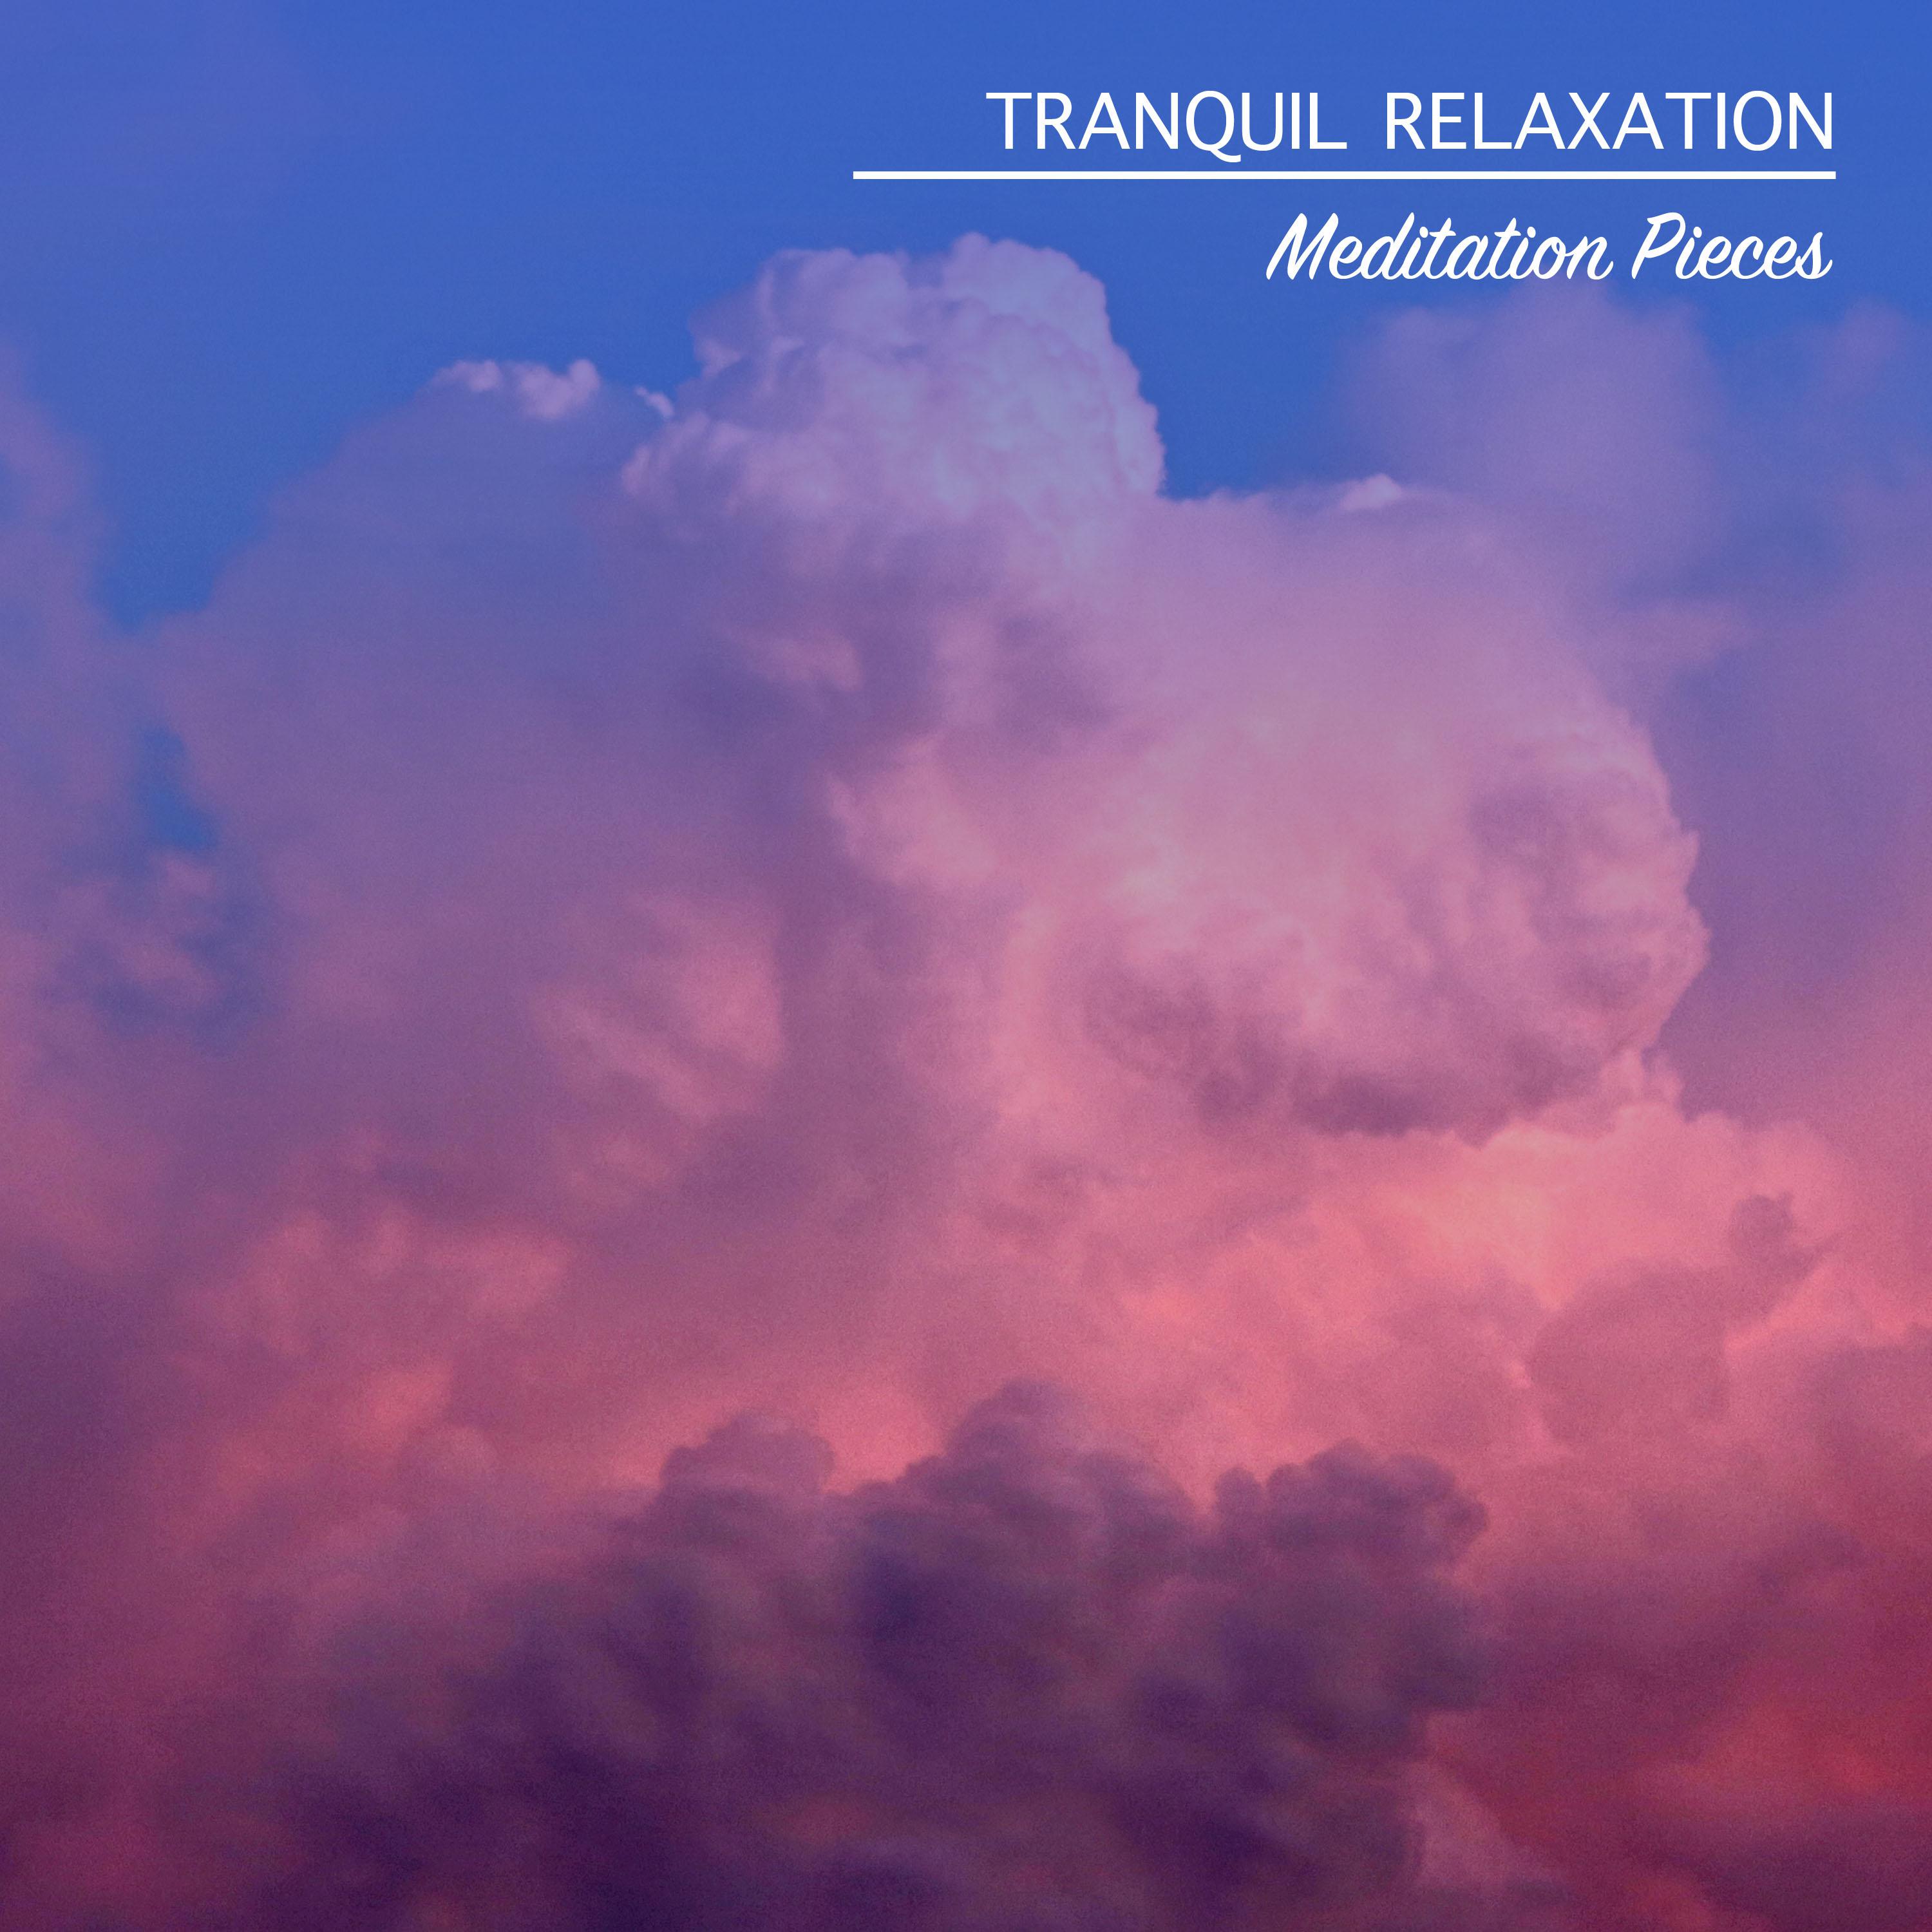 13 Tranquil Relaxation Meditation Pieces